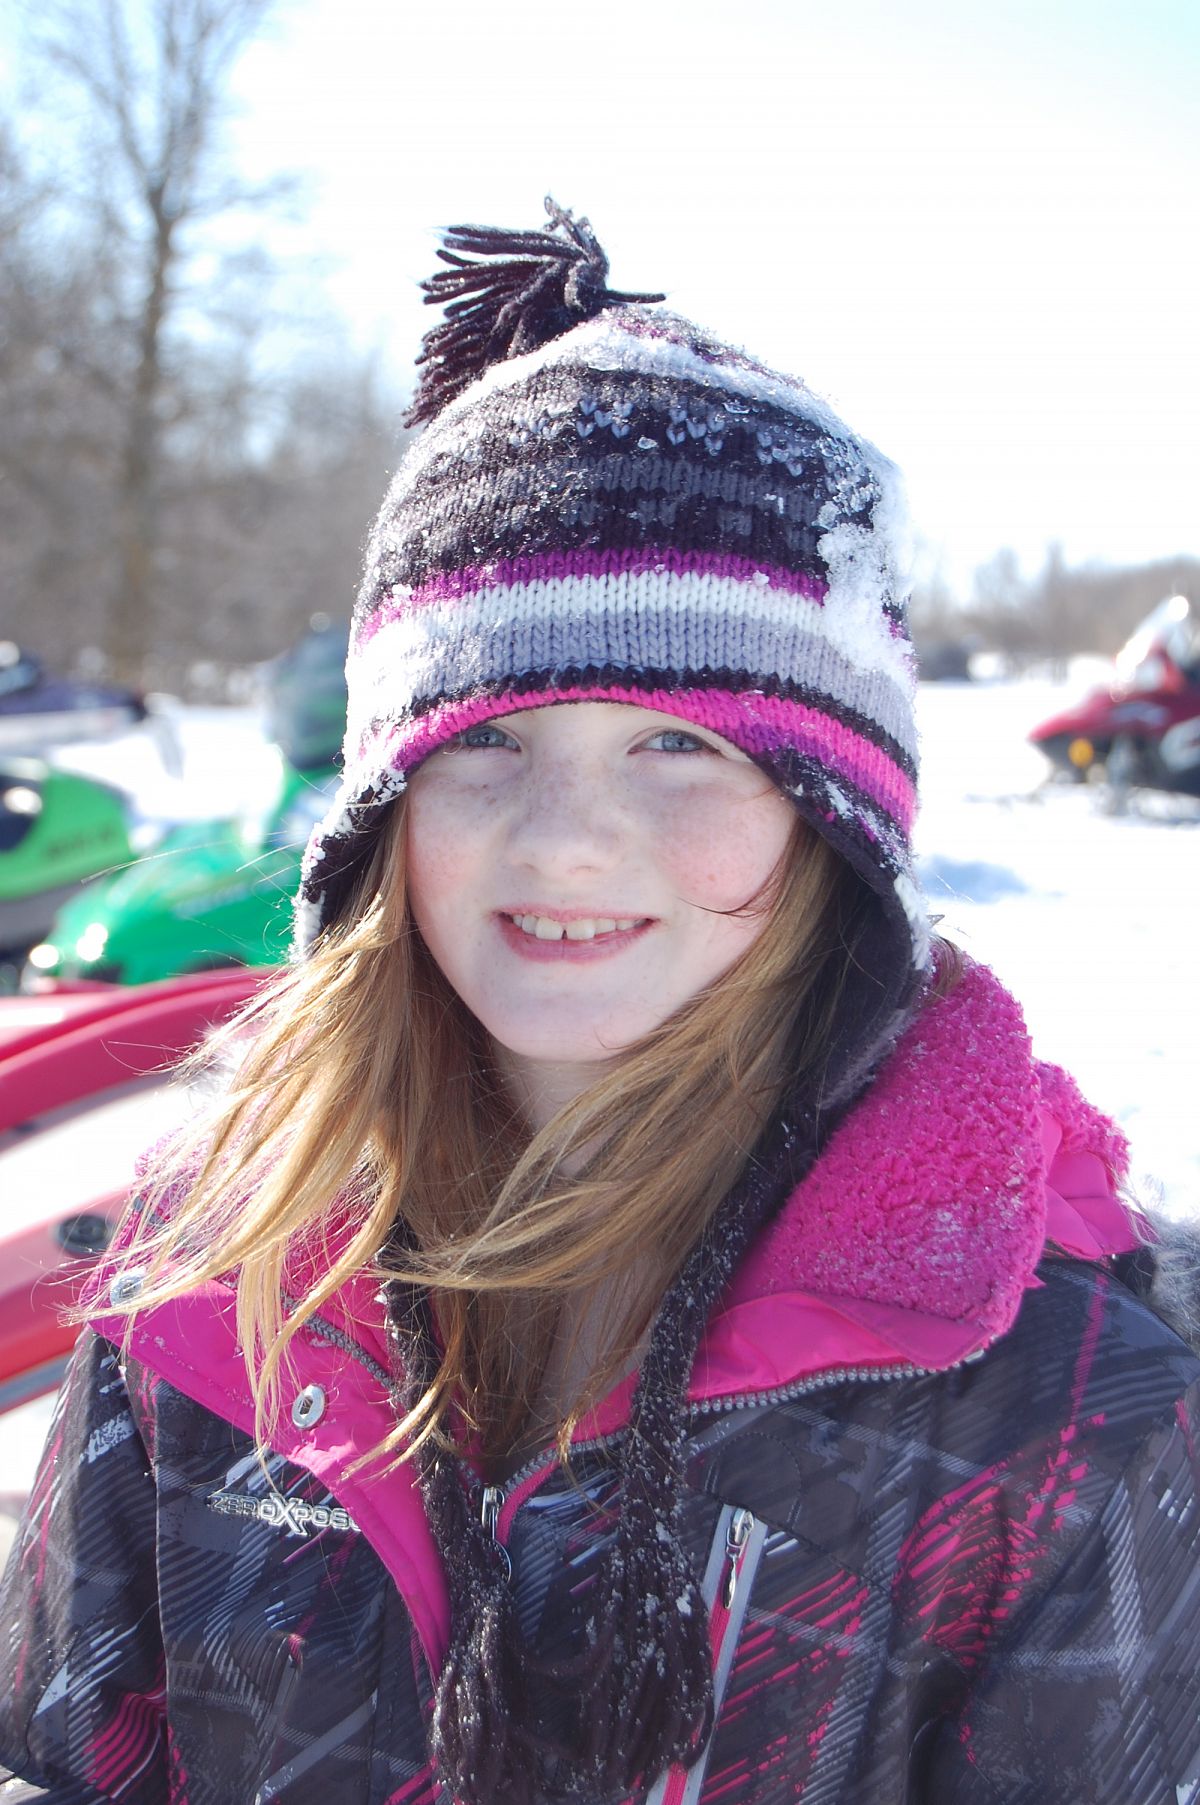 Snowmobiling, a weiner roast and tobogganning with Nana, Papa and Dad make for a big happy smile.